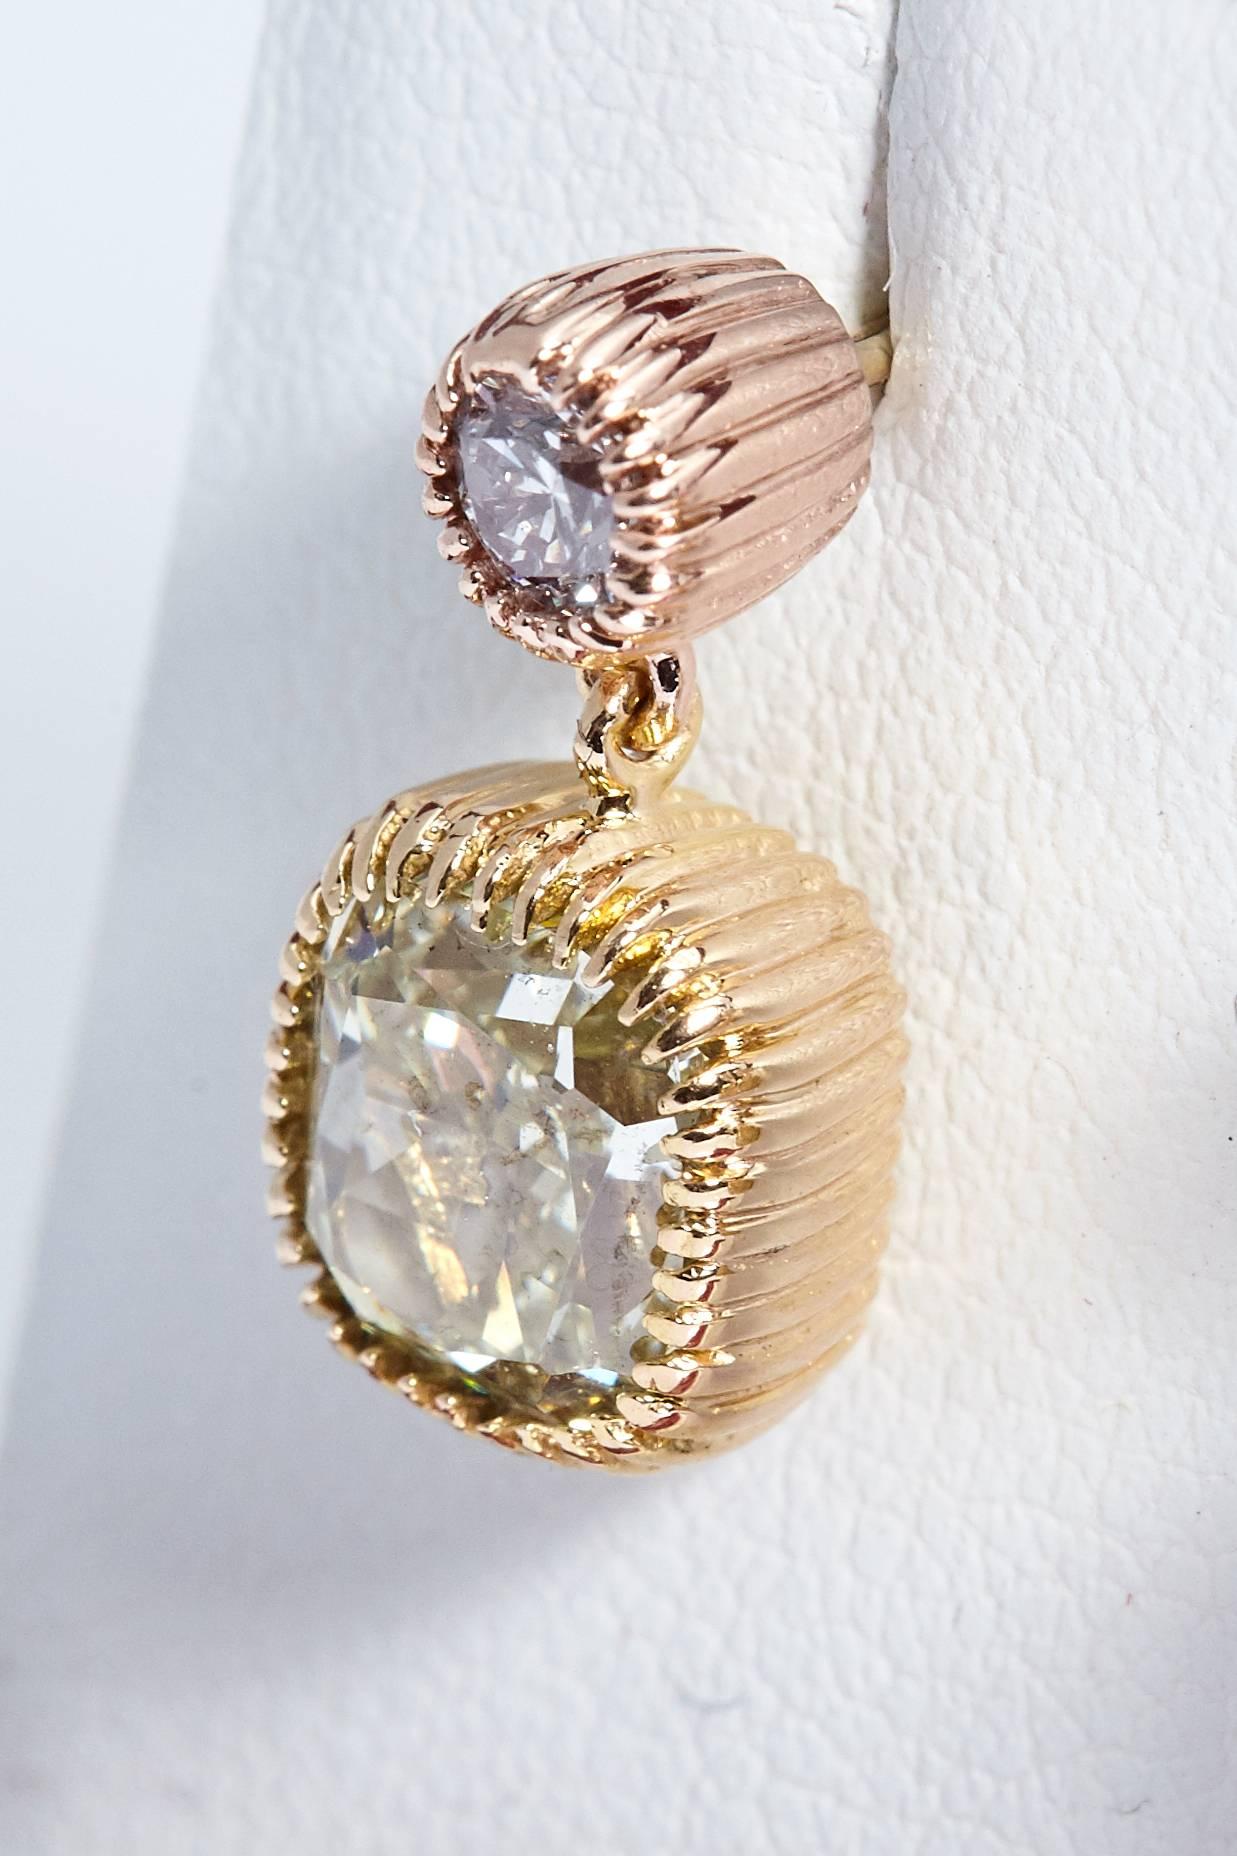 Pink and yellow eighteen karat gold and diamond dangling earrings. All the diamonds have grading reports from the Gemological Institute of America. The 2 cushion shaped diamonds have a total weight of 3.02 carats and are Fancy Light Yellow in color.